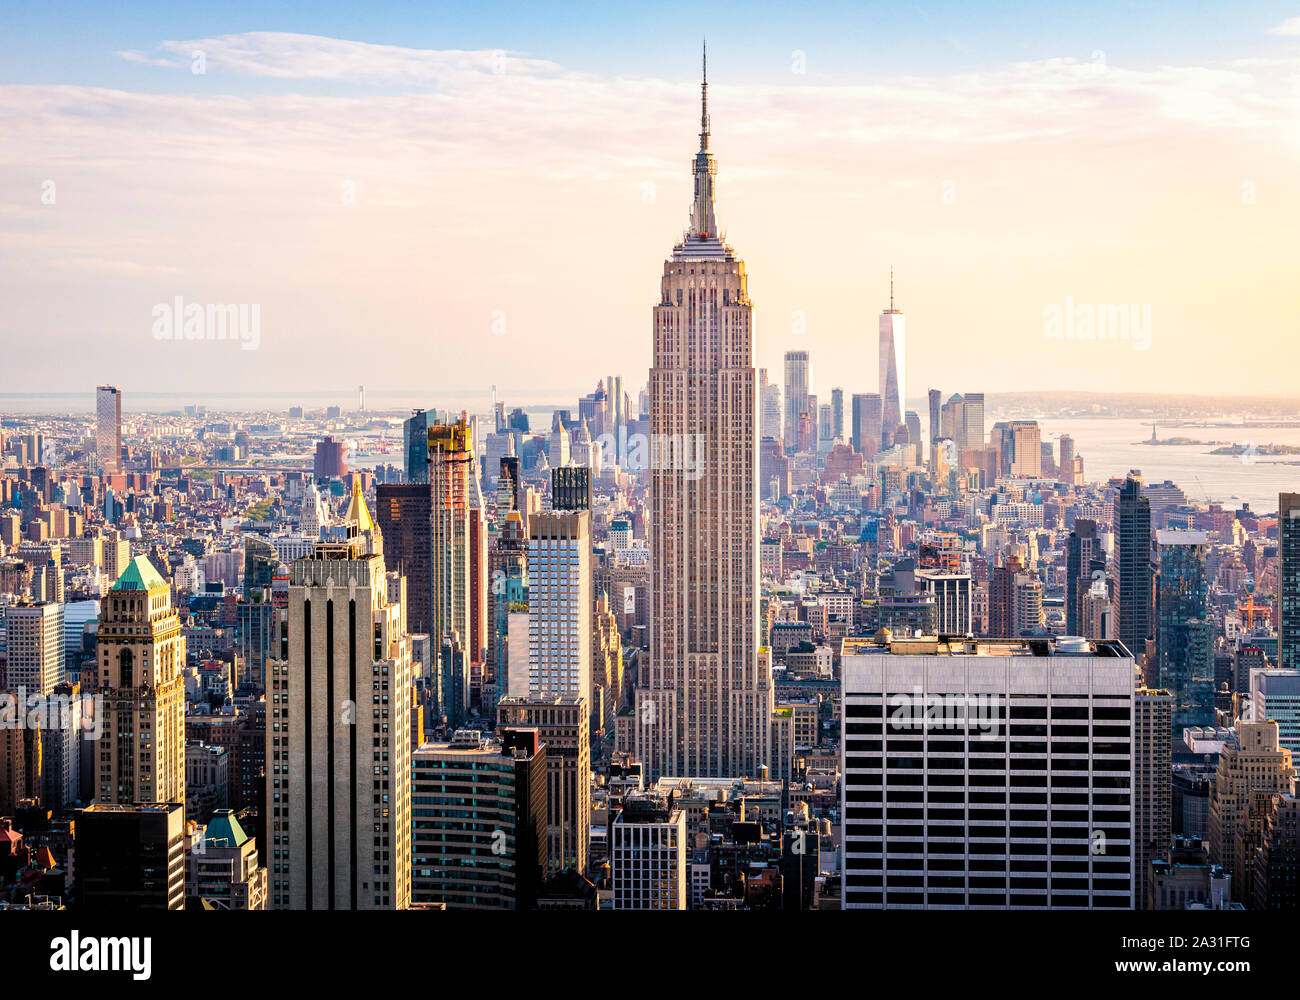 The New York City skyline including the Empire State Building, One World Trade Center and the Hudson River, USA. Stock Photo